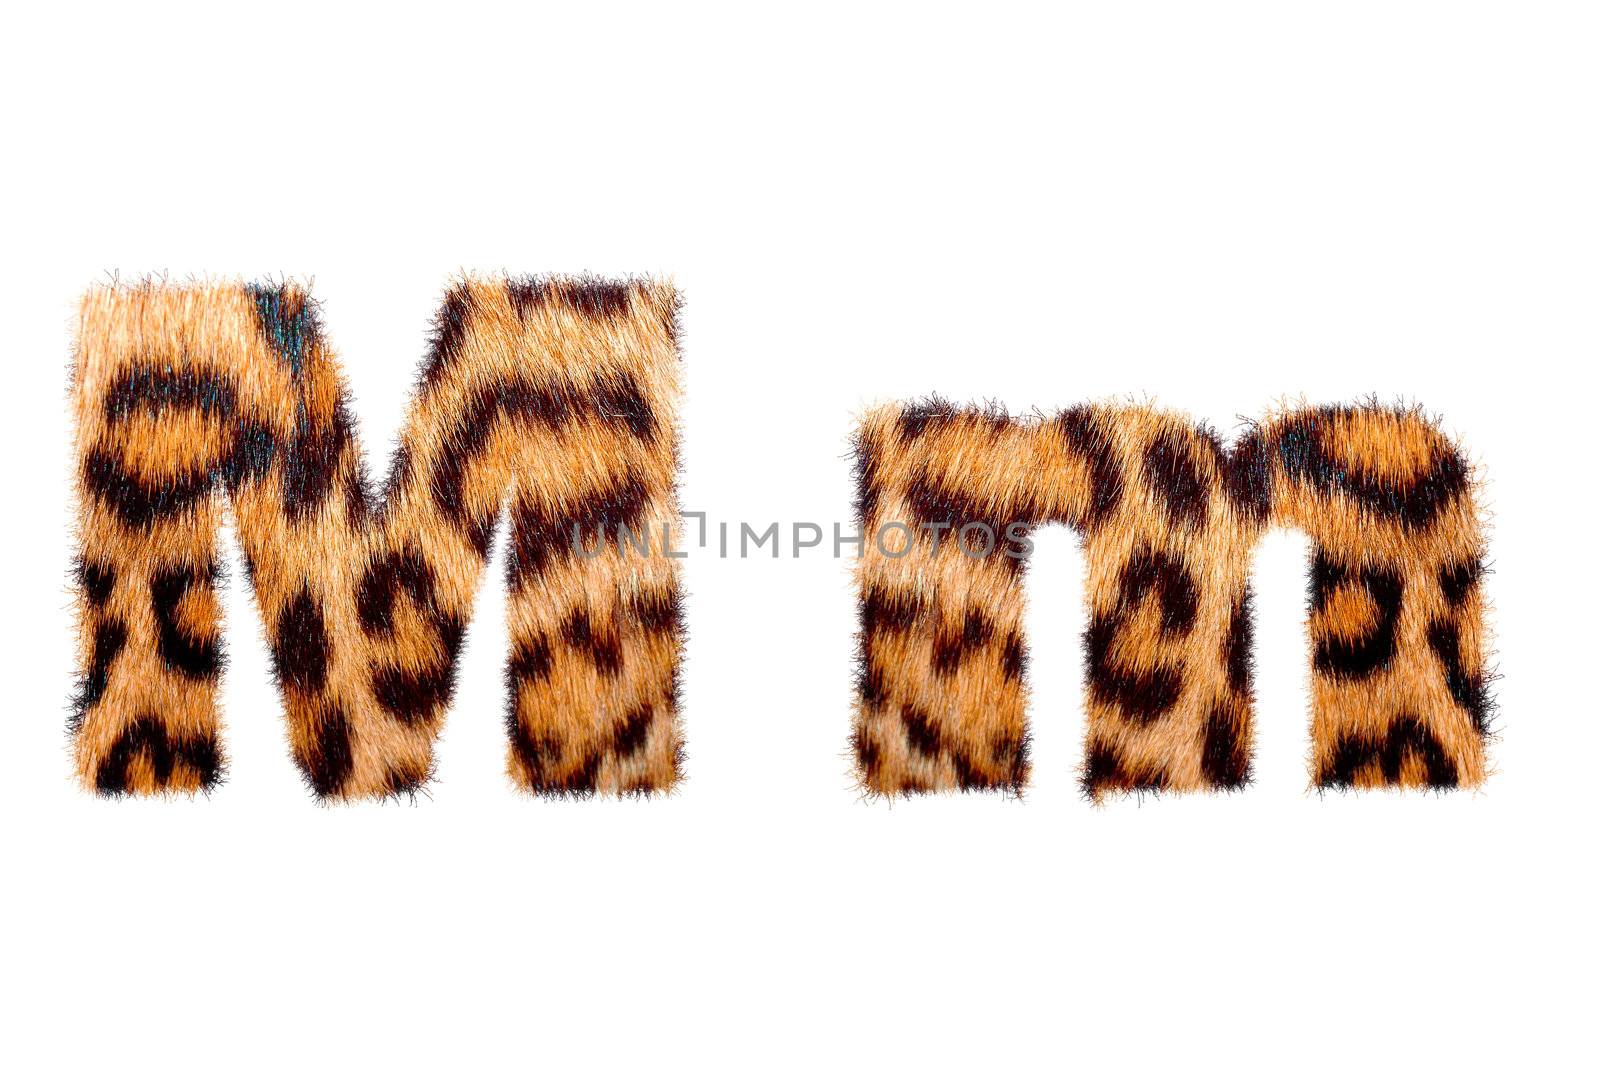 Custom english text base on leopard skin, isolated in white